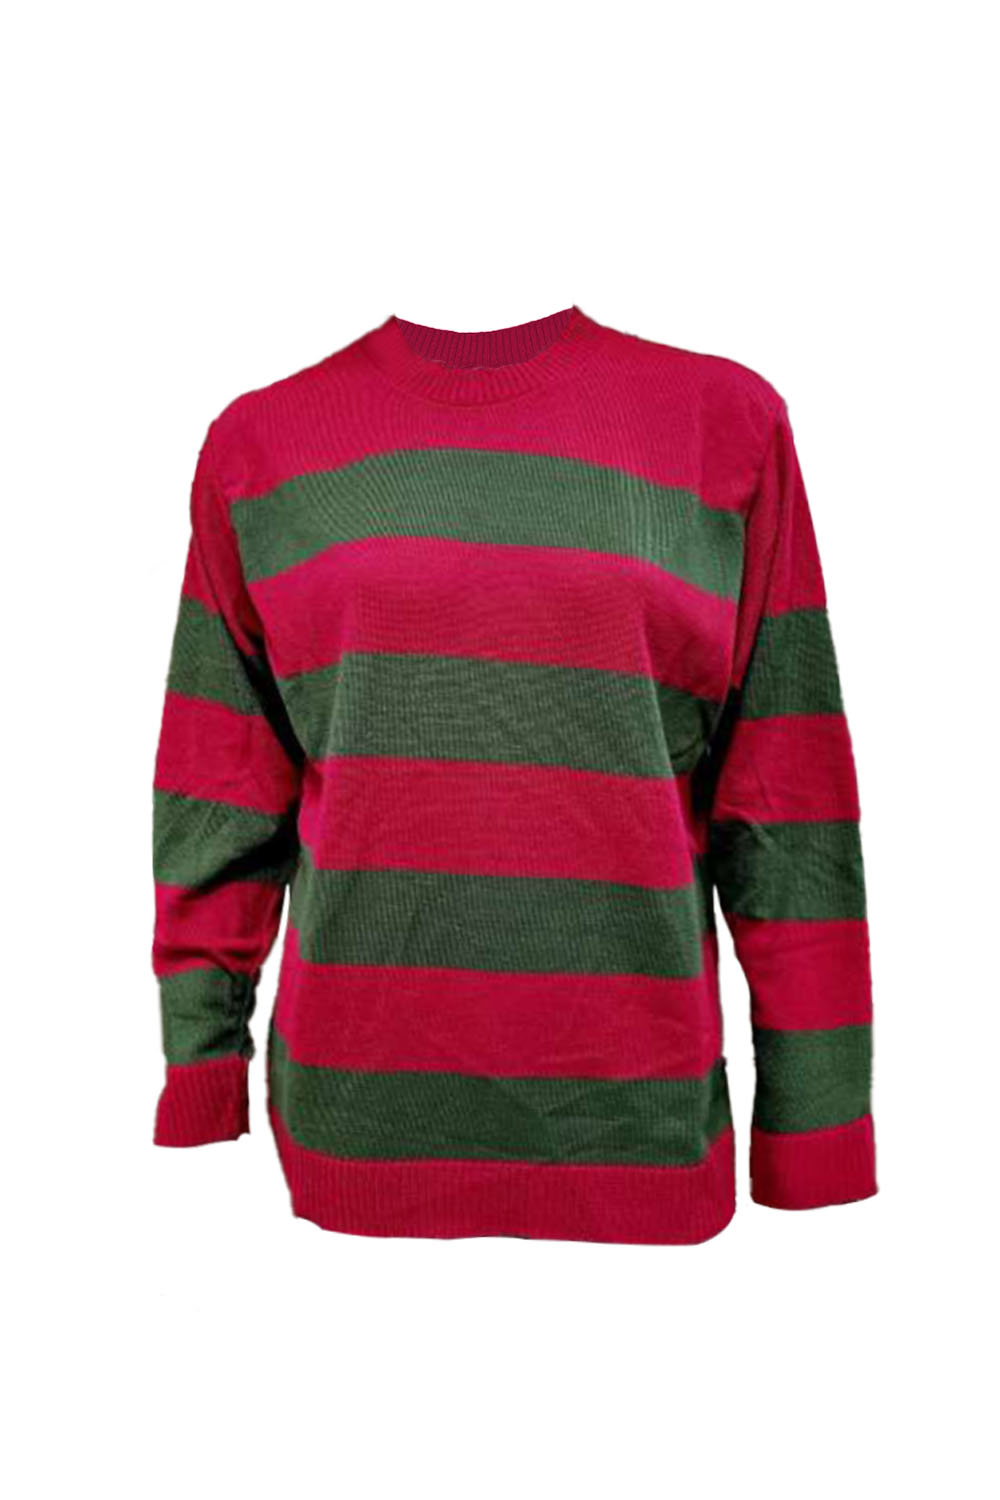 Wickedfun Men Red and Green Stripe Knitted Jumper